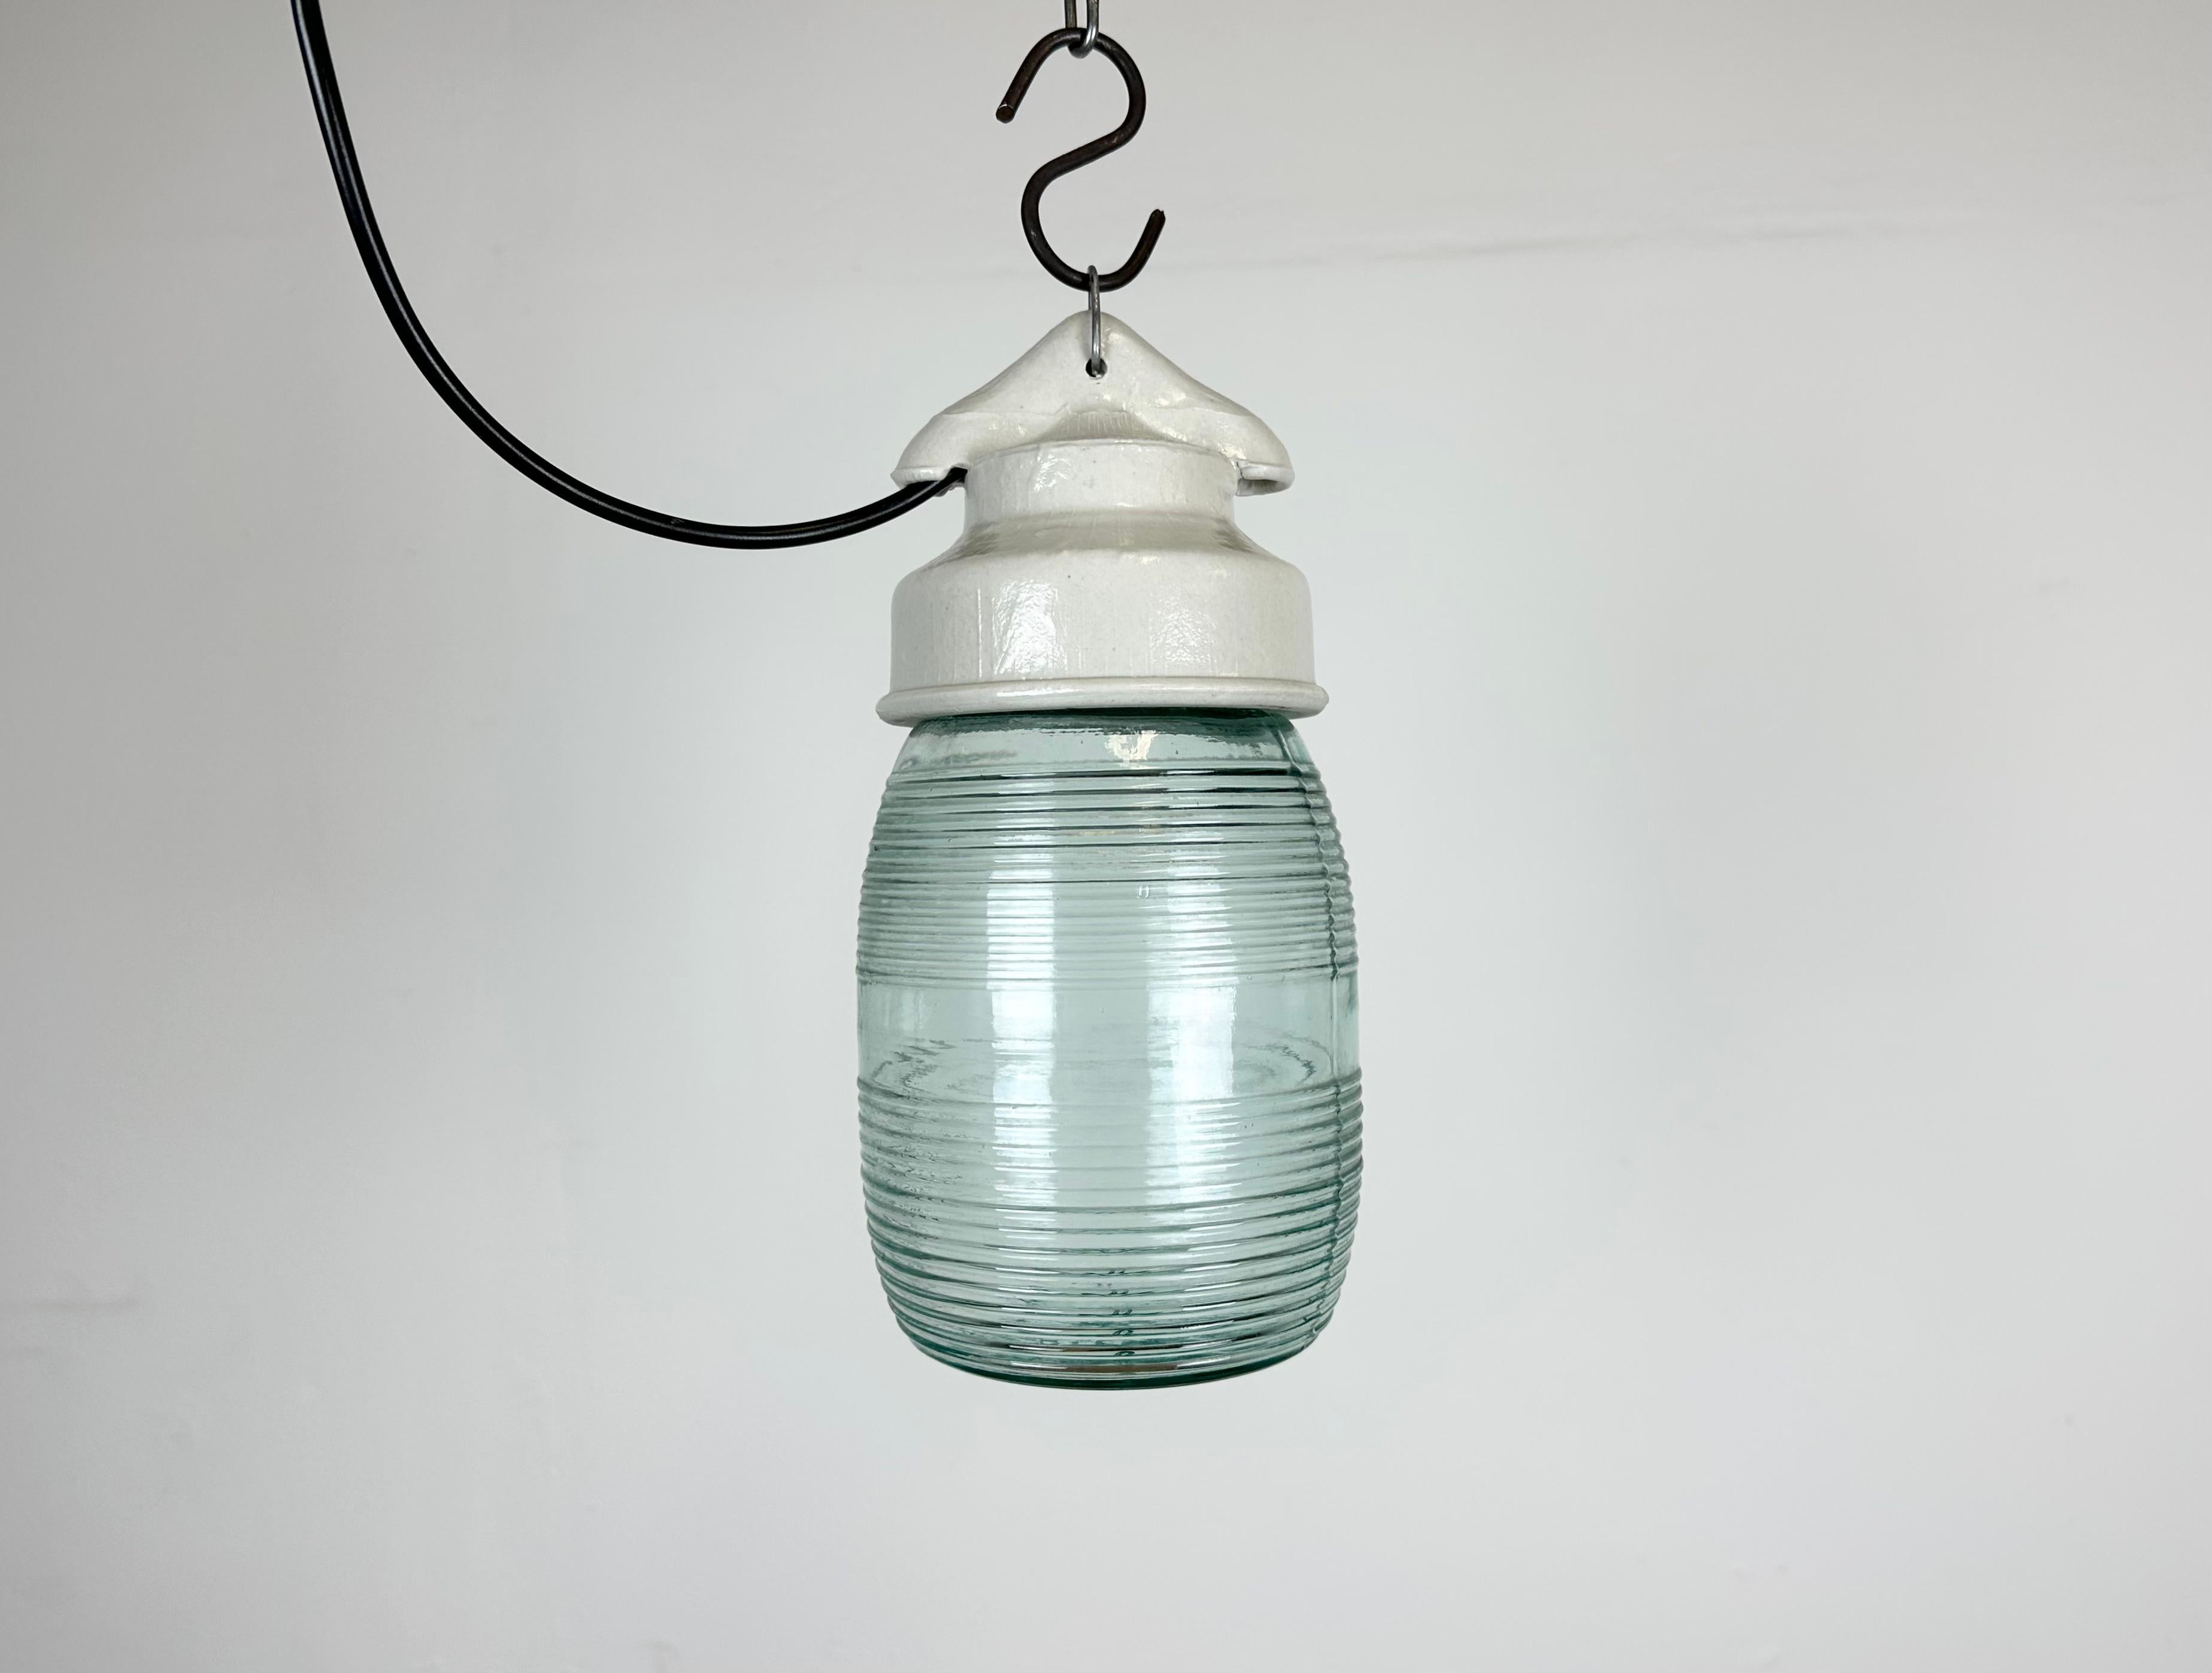 Vintage industrial light made in former Soviet Union during the 1970s.It features a white porcelain top and a light green ribbed glass cover. The socket requires E27/ E26 light bulbs. New wire. The weight of the light is 1kg.